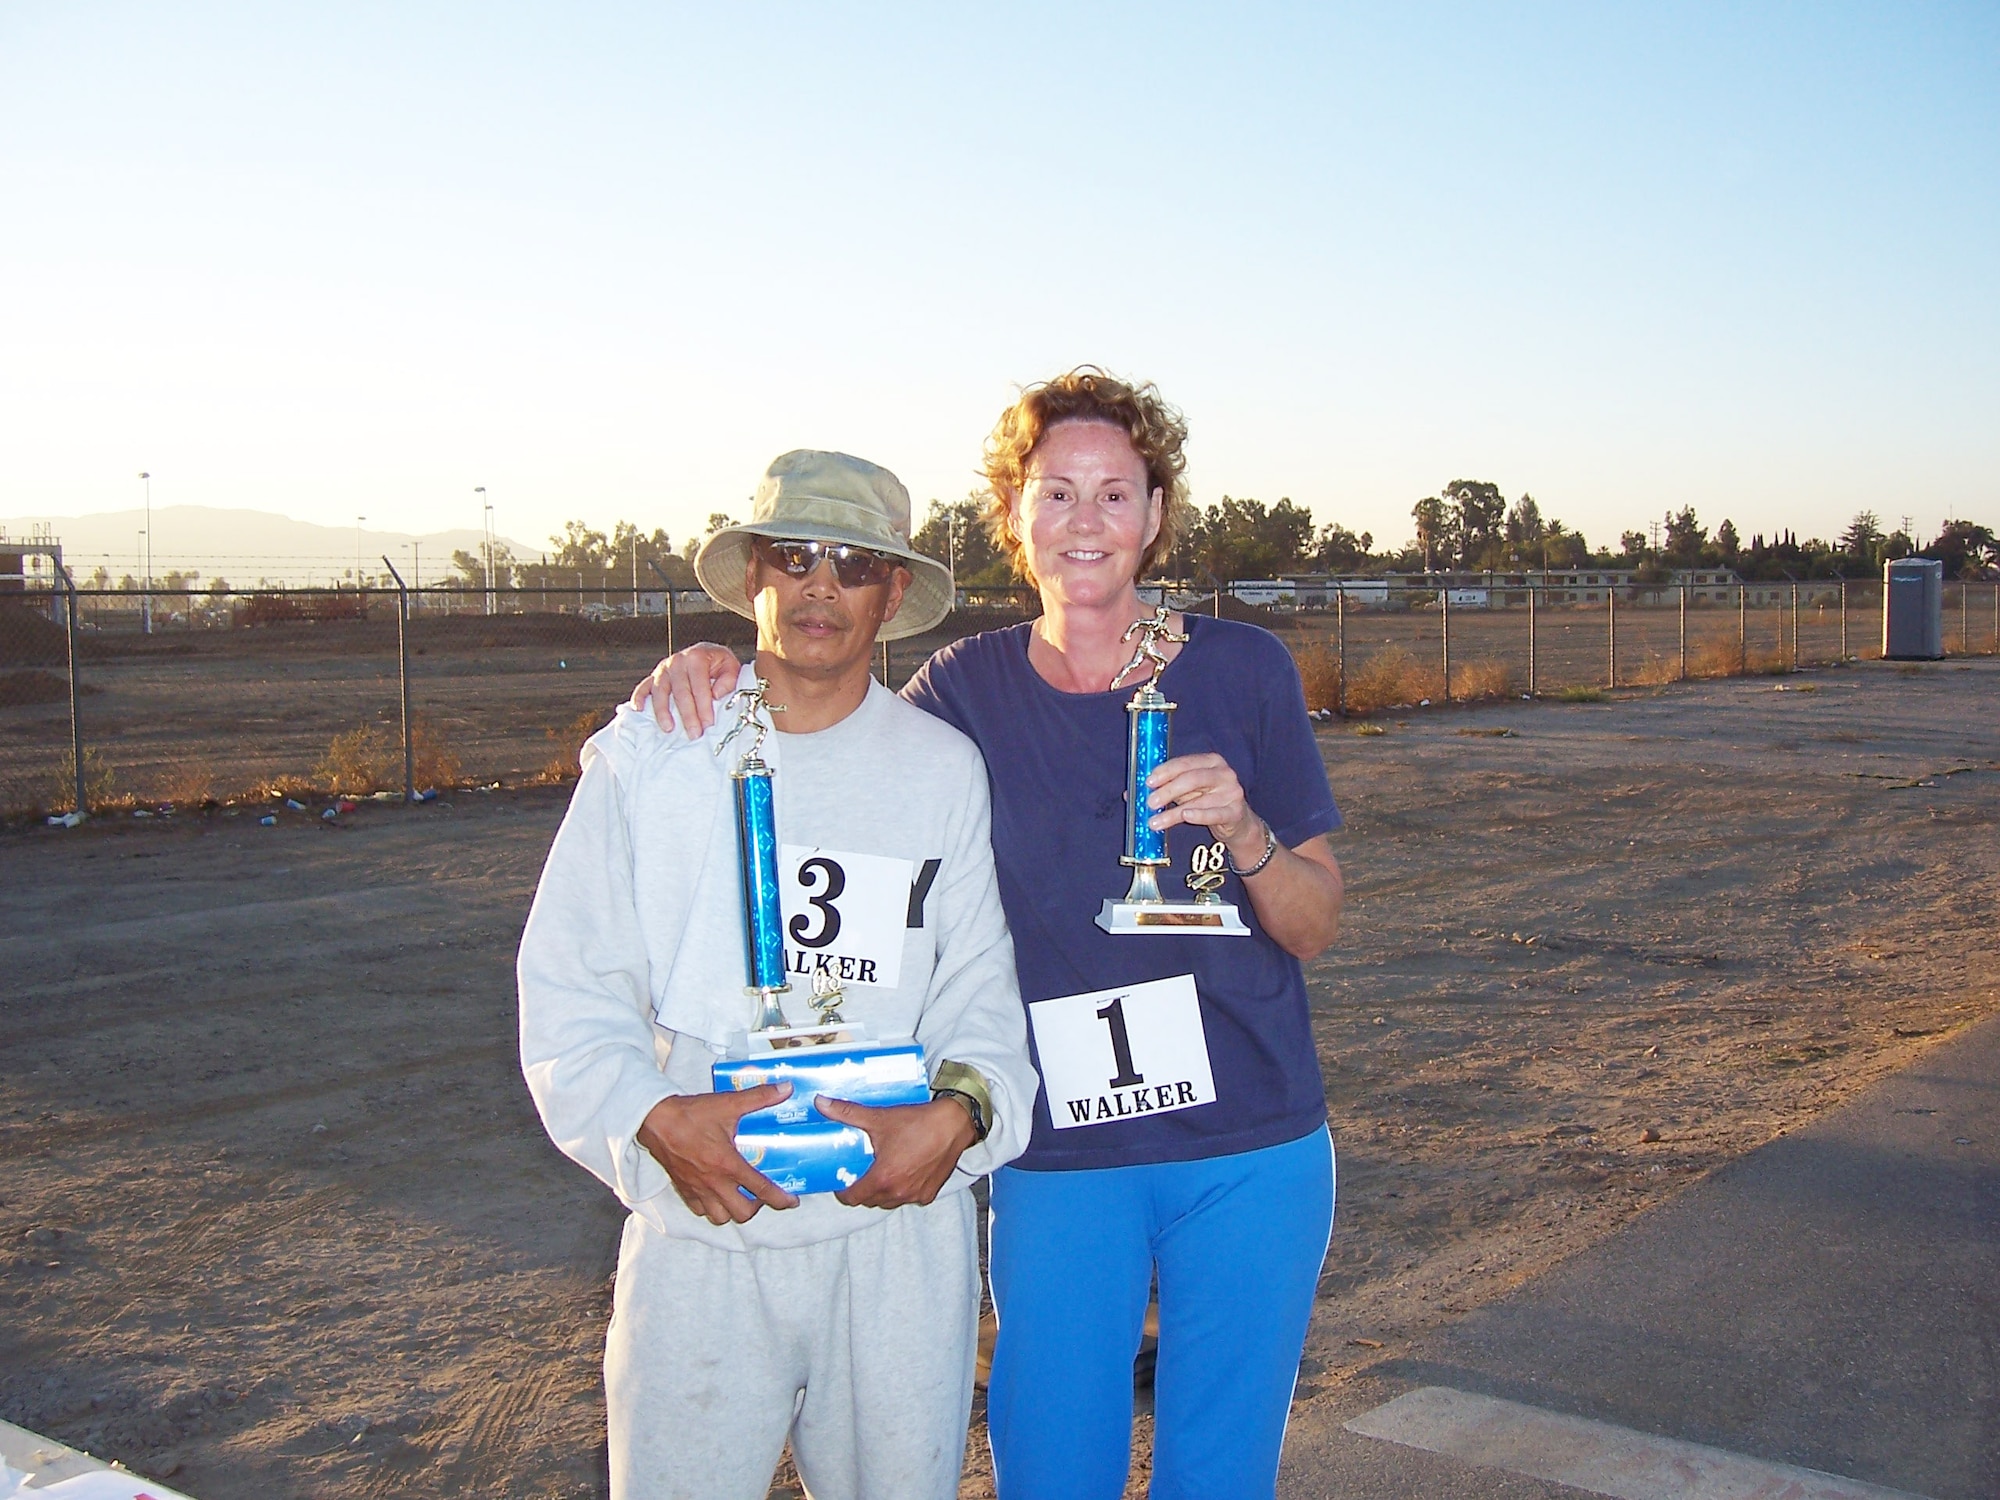 Winners of the 5K Walk are: Ernie Roux, retired, 1st place; Meike Wheeler, AFAA, 2nd
place; and not pictured is John Andrews, AFAA, who took 3rd.(U.S. Air Force photo)